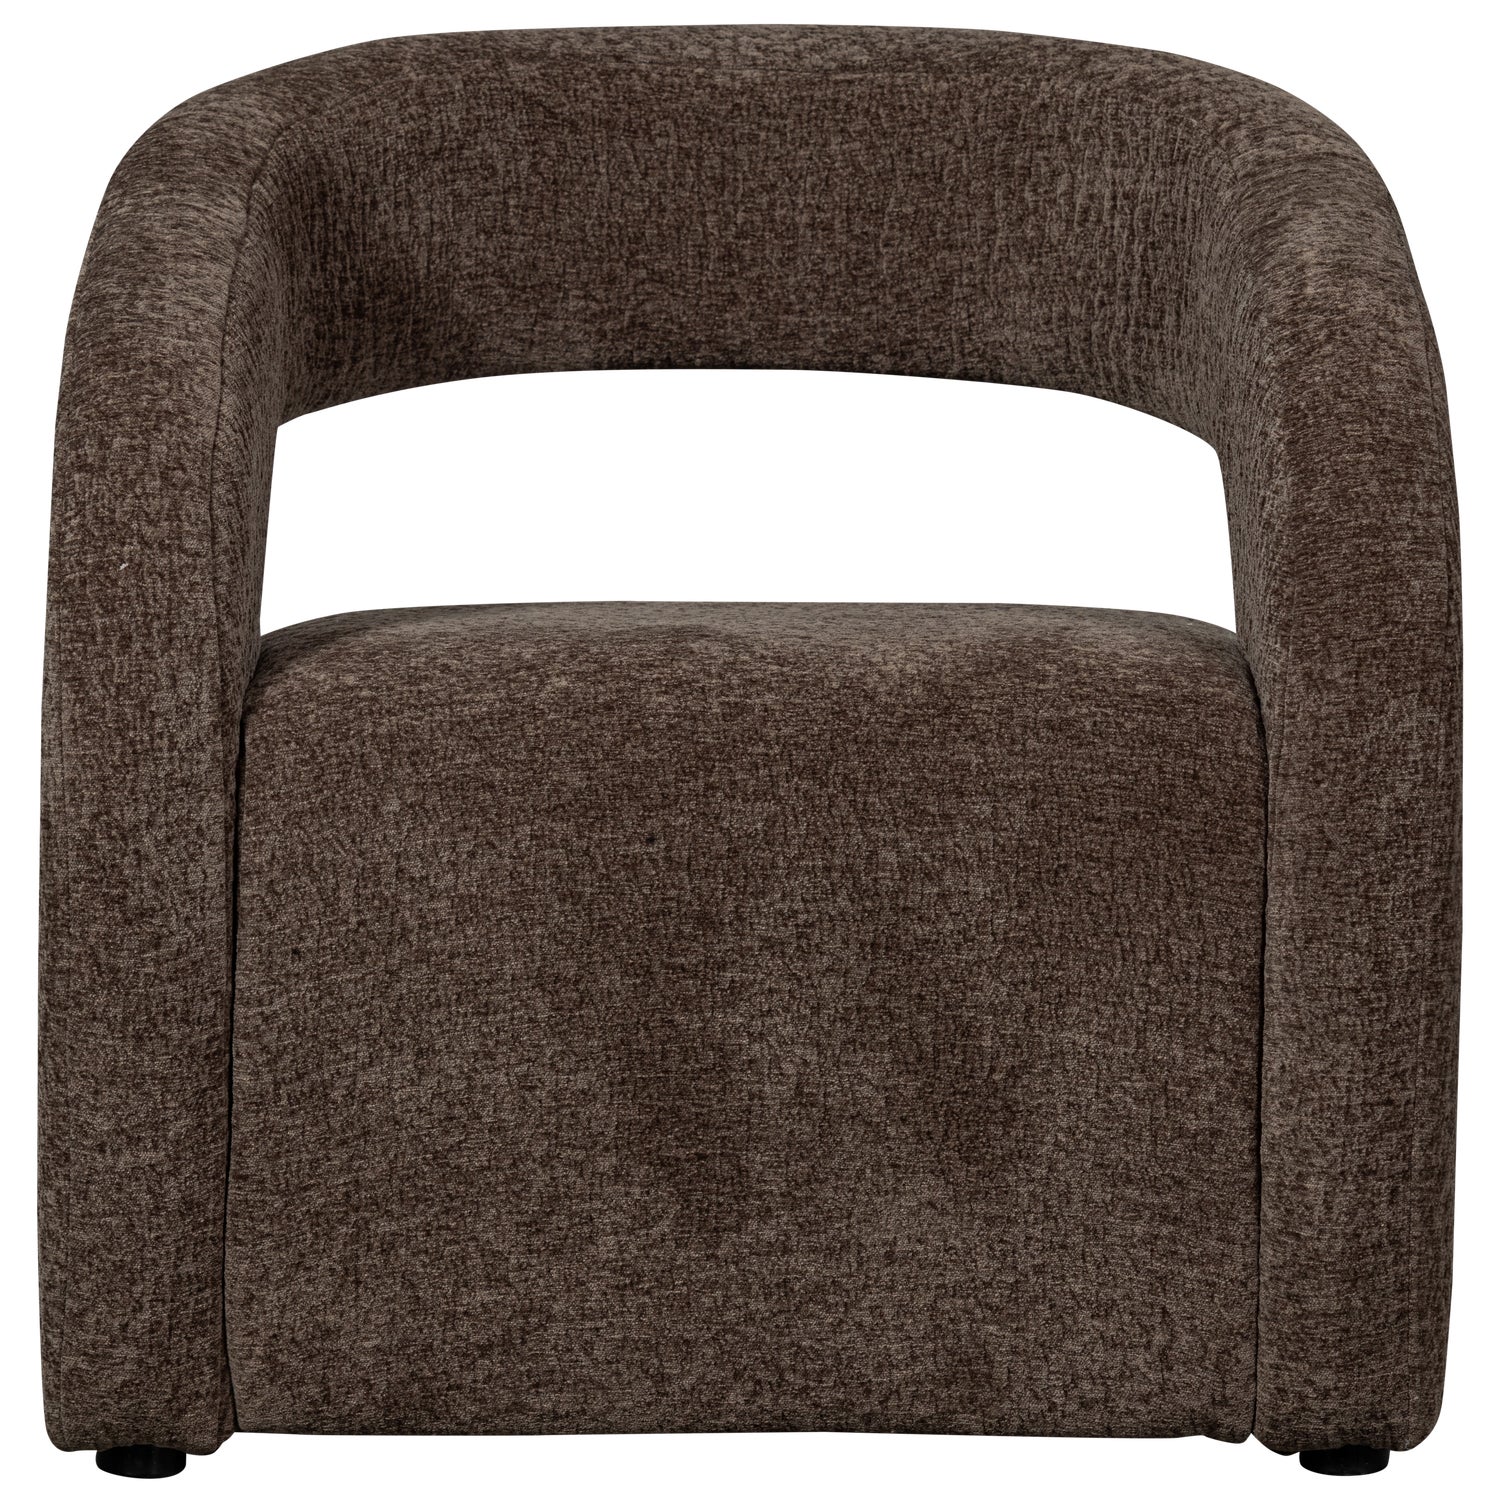 801432-E-01_VS_BP_Radiate_fauteuil_textured_espresso.png?auto=webp&format=png&width=1500&height=1500